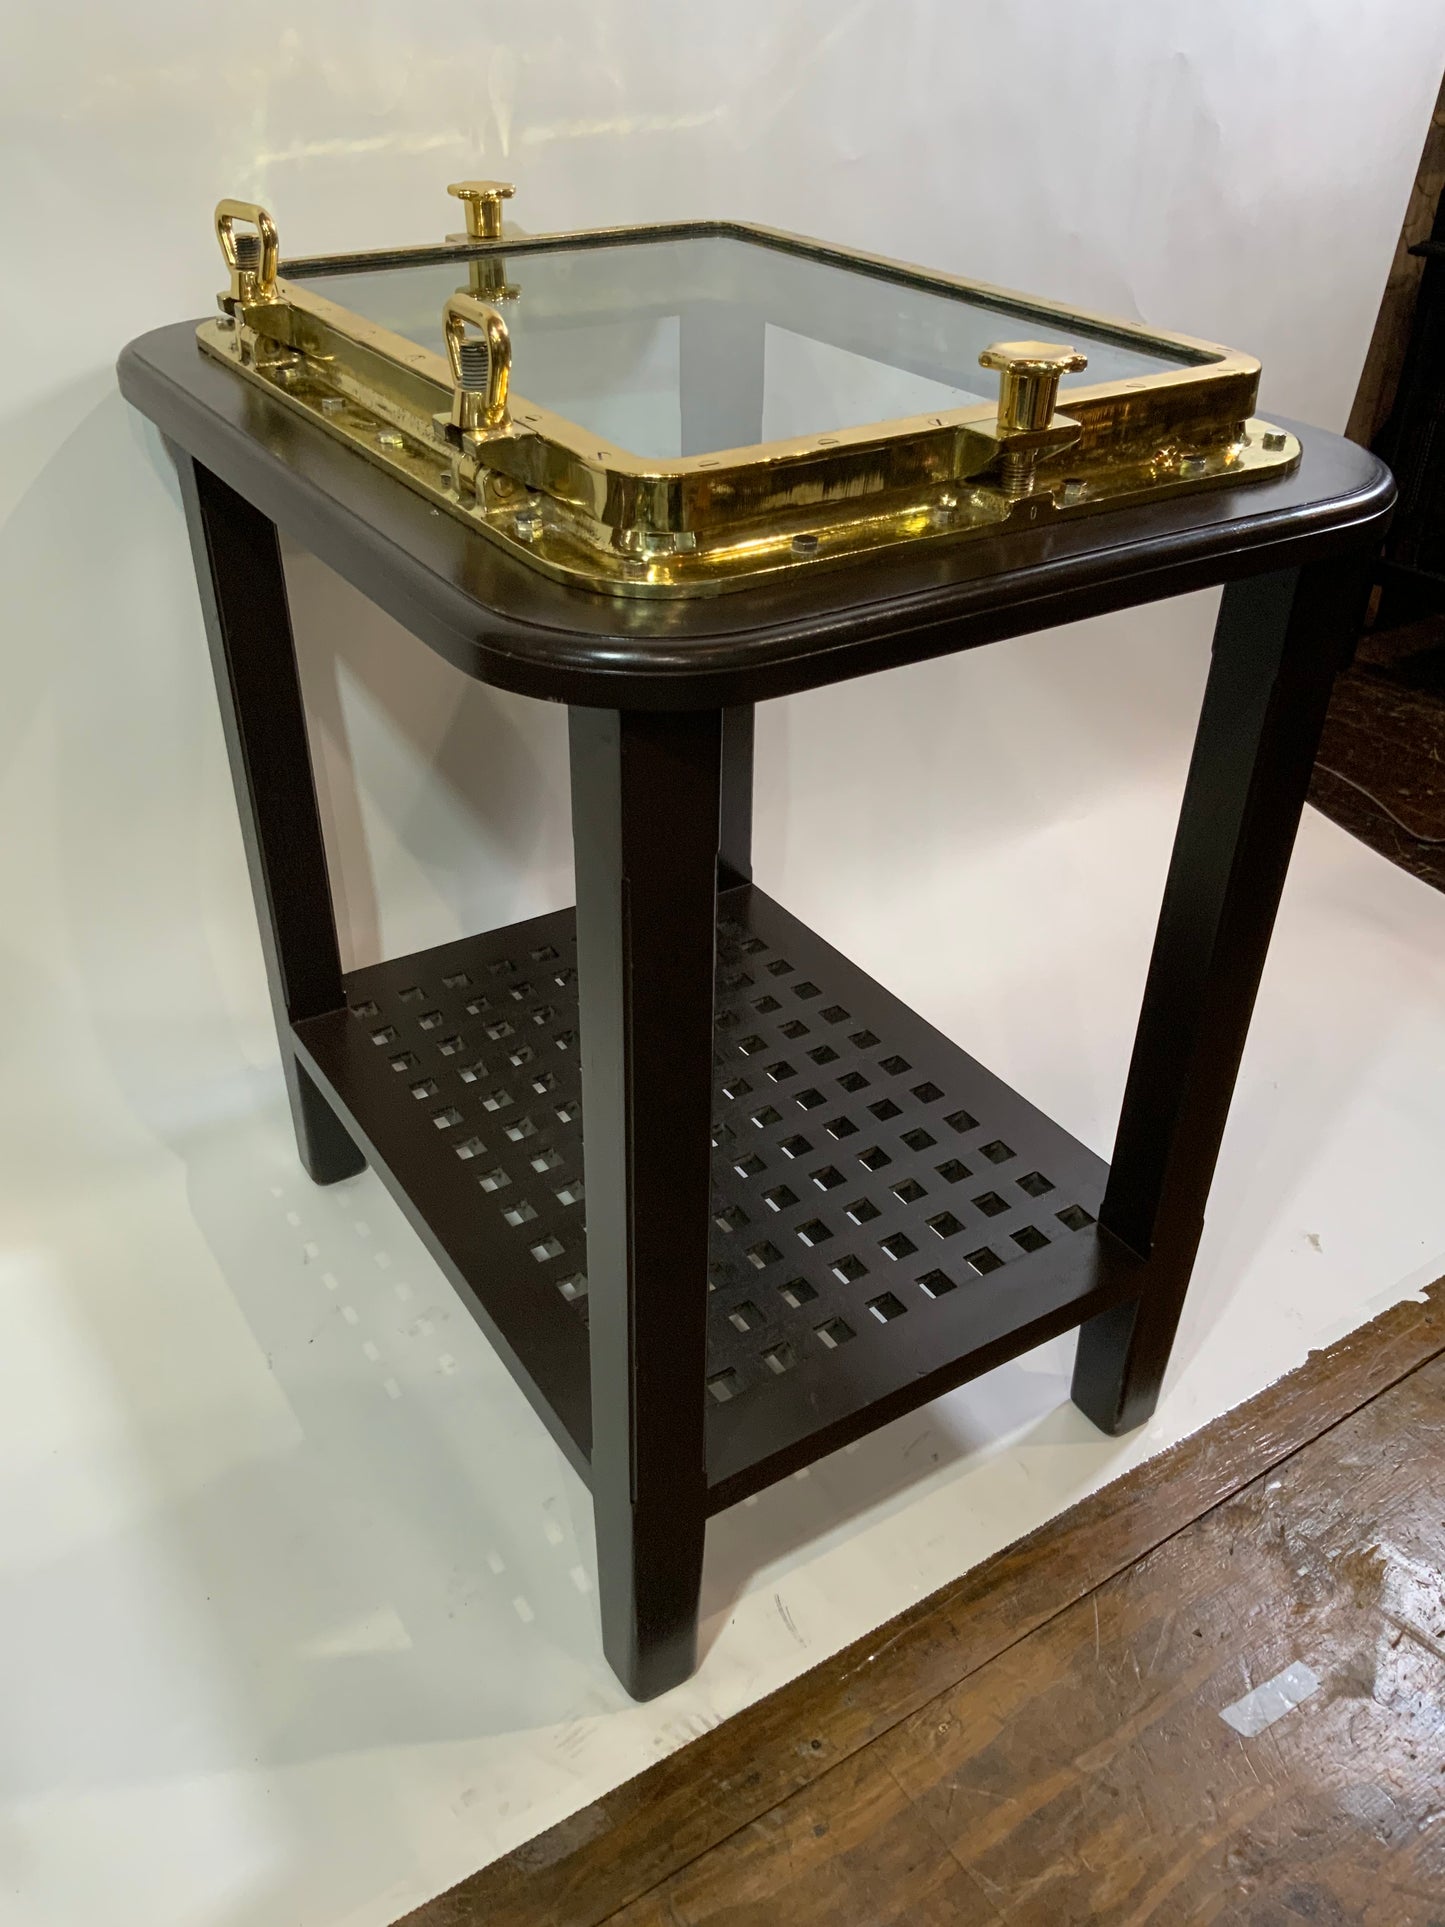 Polished Brass Ships Porthole Table - Lannan Gallery